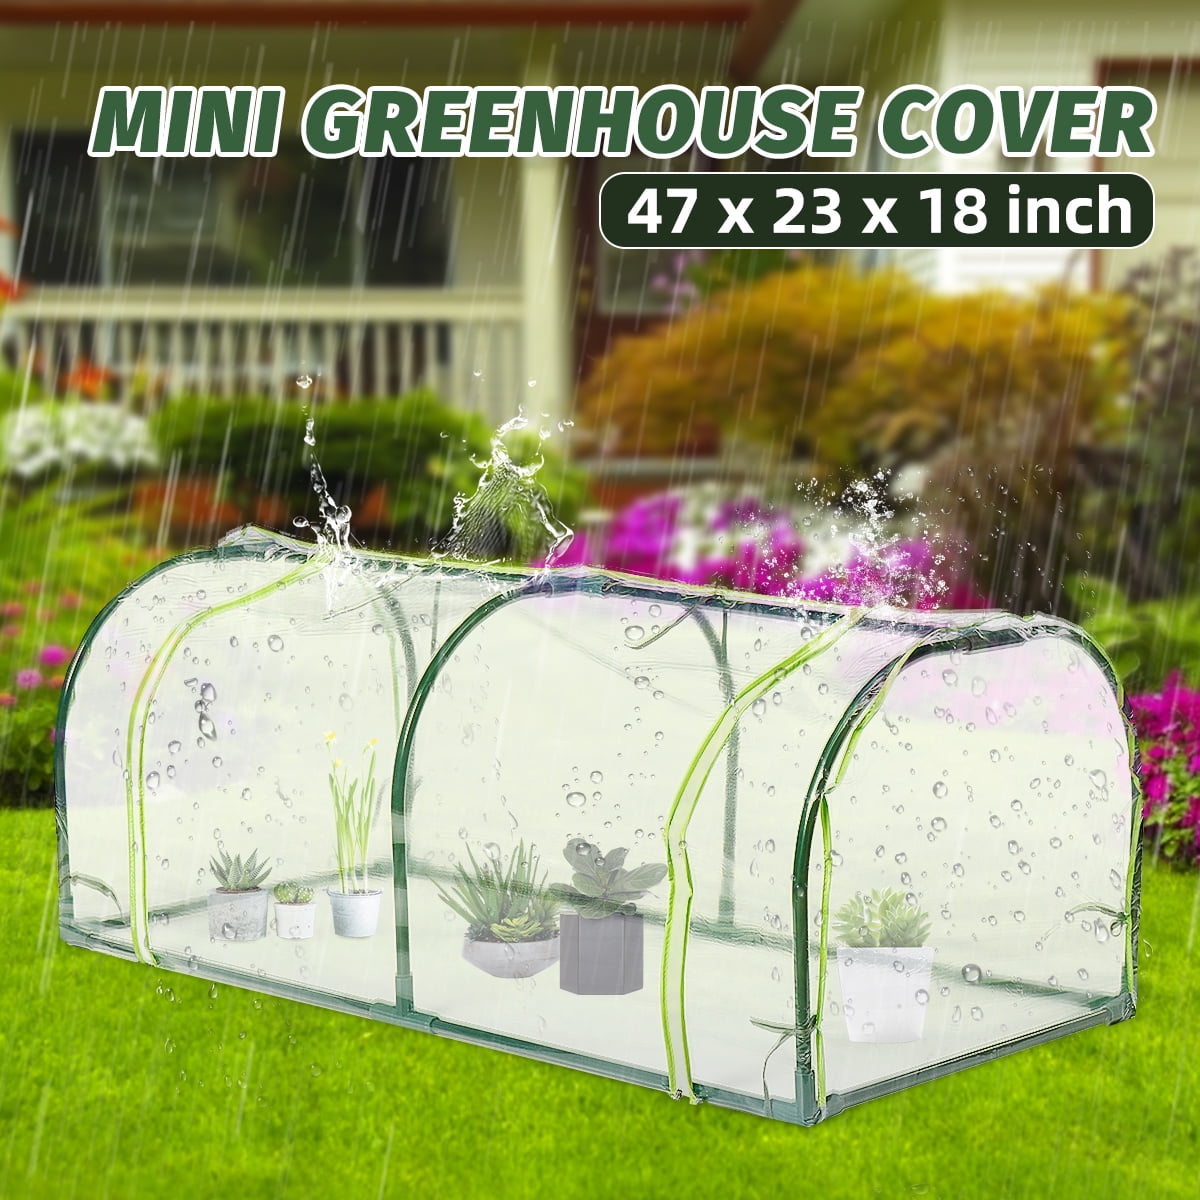 Rainproof Mini Greenhouse Cover Green House Garden Outdoor Plants Growing Shed 